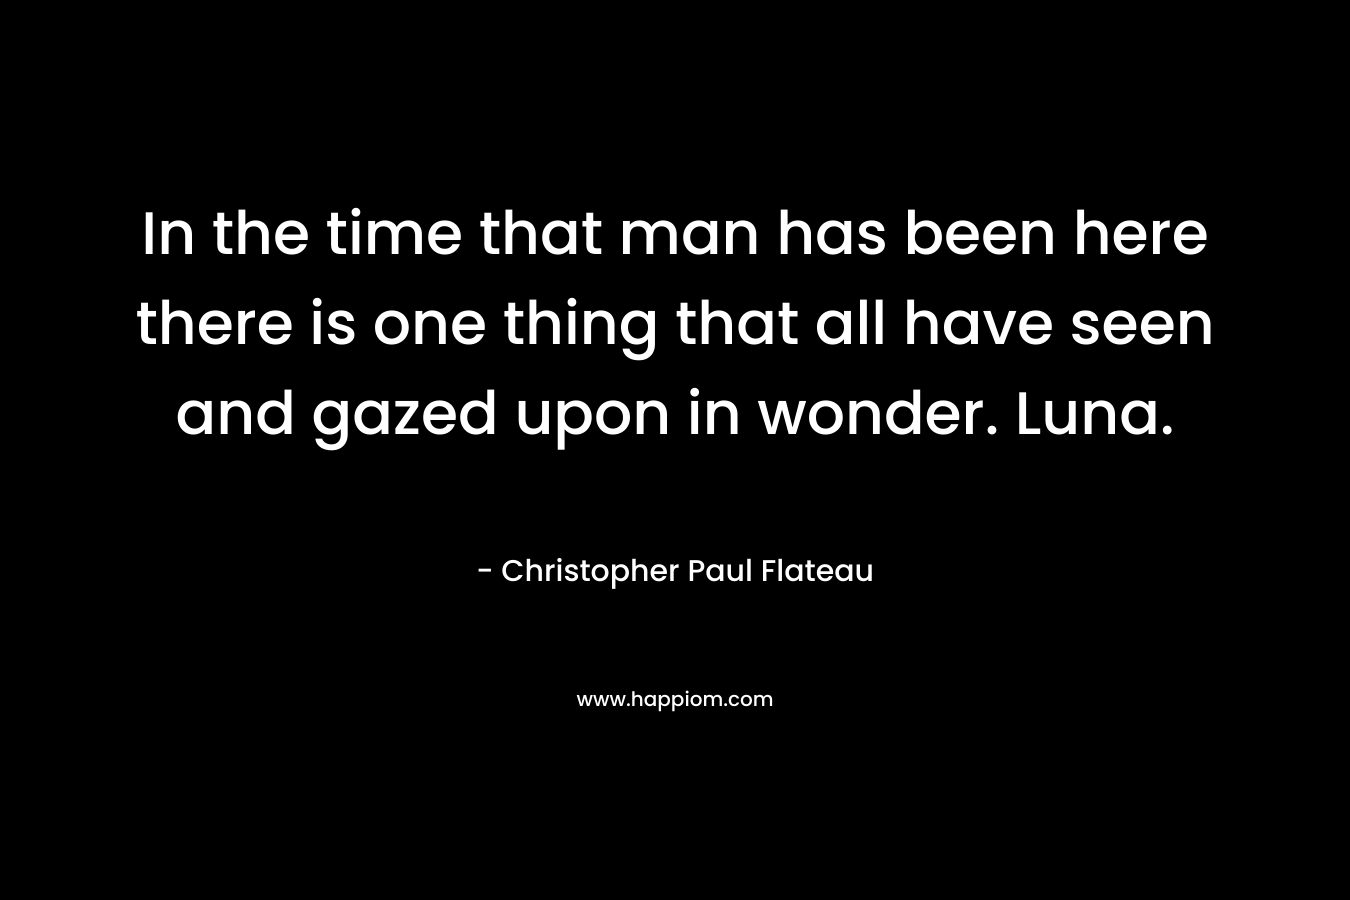 In the time that man has been here there is one thing that all have seen and gazed upon in wonder. Luna. – Christopher Paul Flateau